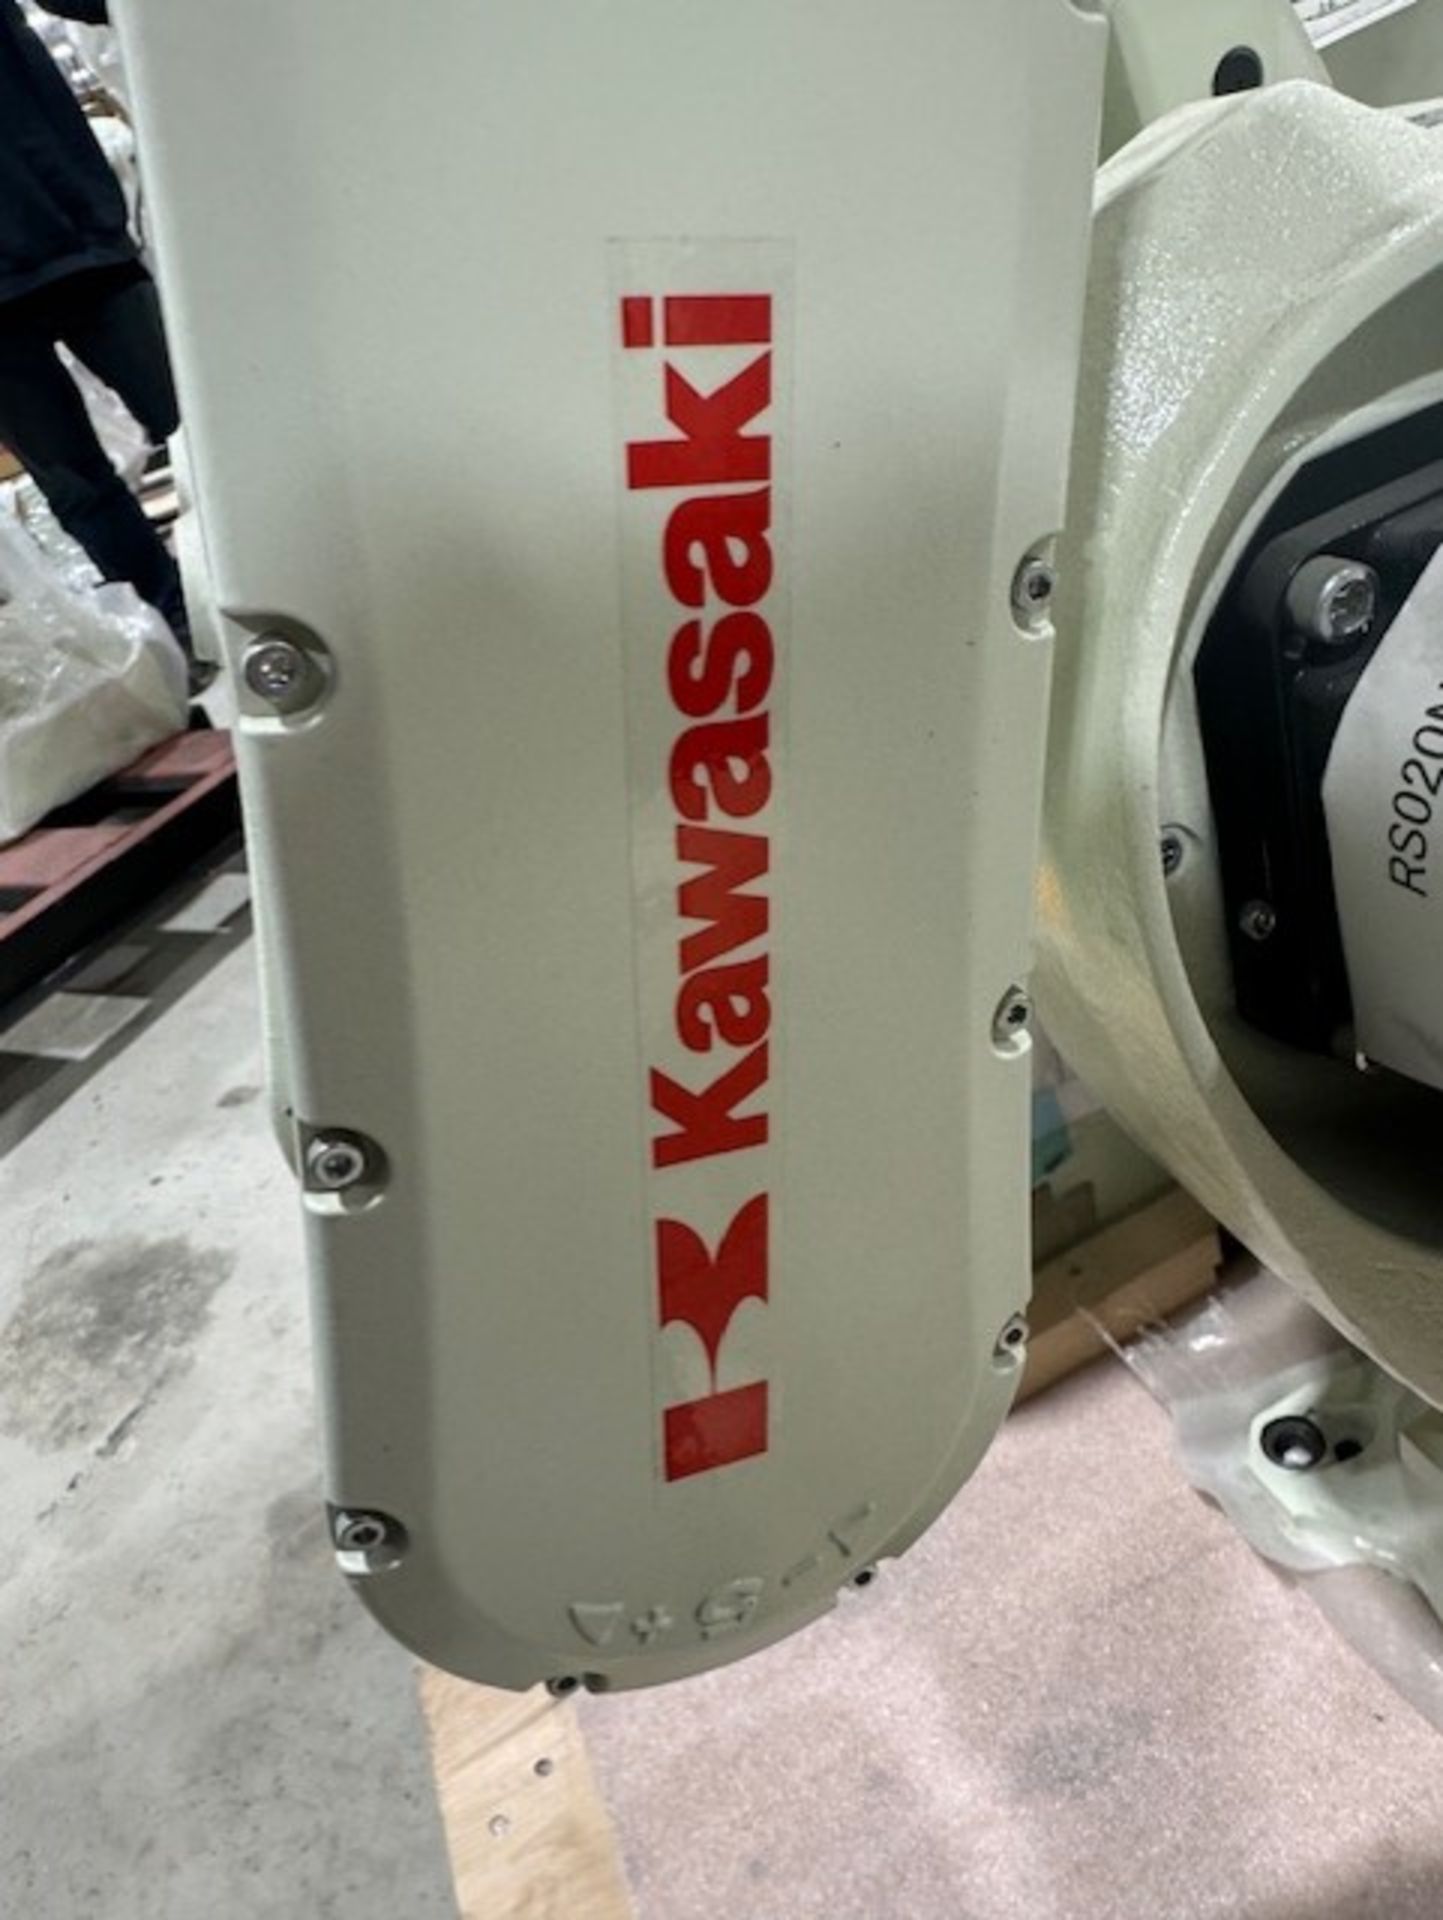 NEW KAWASAKI ROBOT MODEL RS020N, SN 4580, 20KG X 1725MM REACH WITH EO1 CONTROLS, CABLES & TEACH - Image 5 of 7